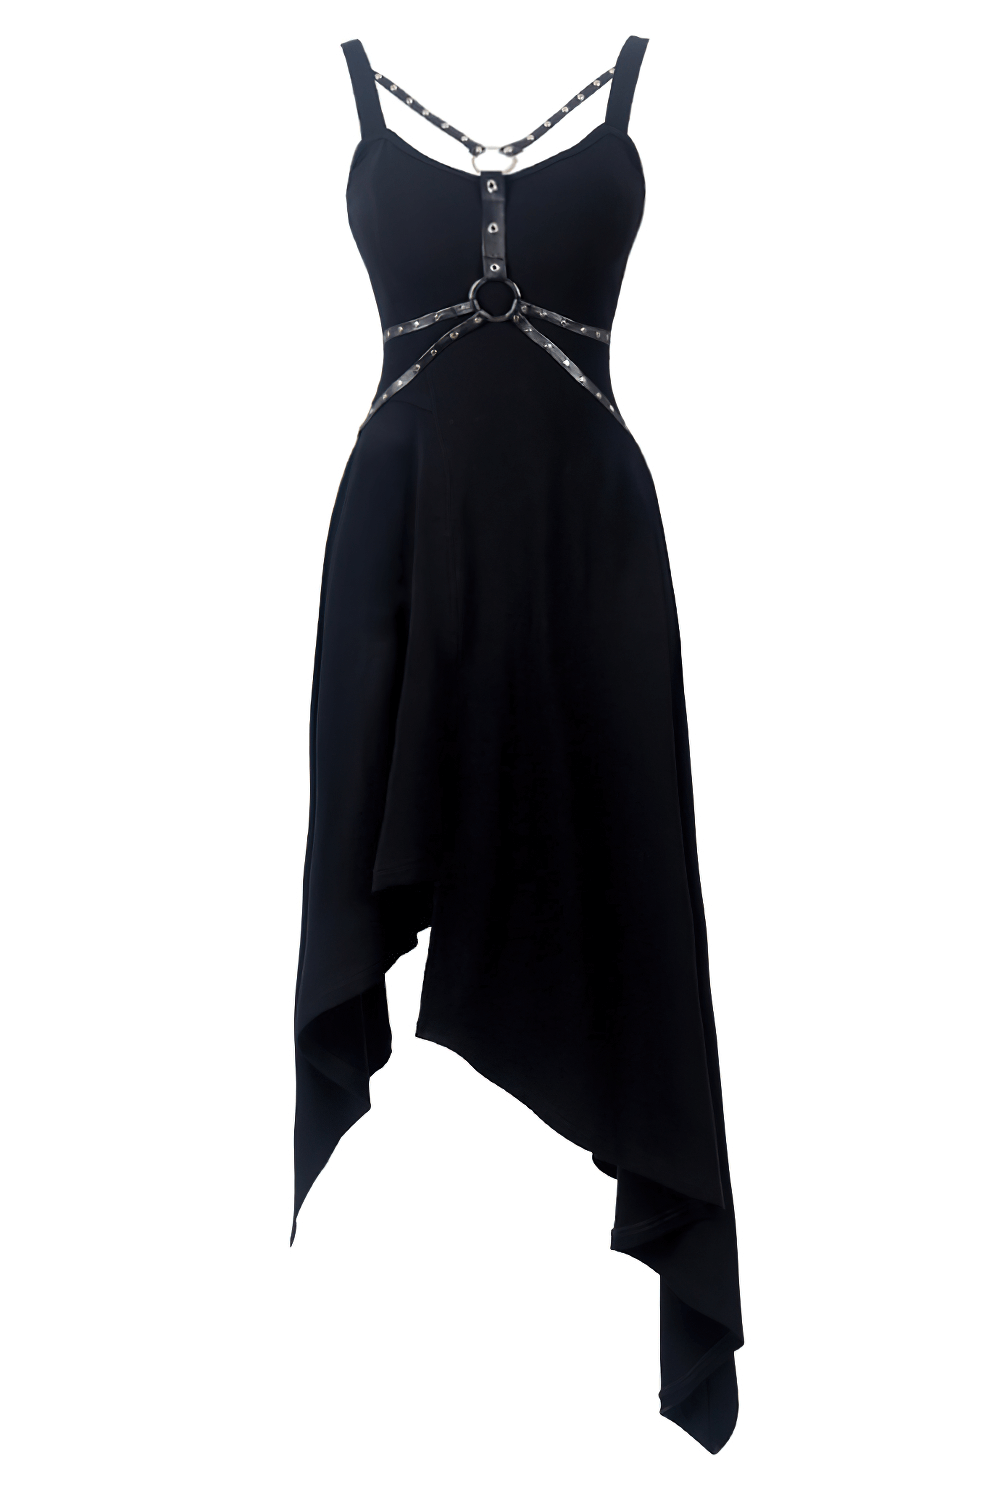 Chic Asymmetrical Dress with Strap and Chain Detailing